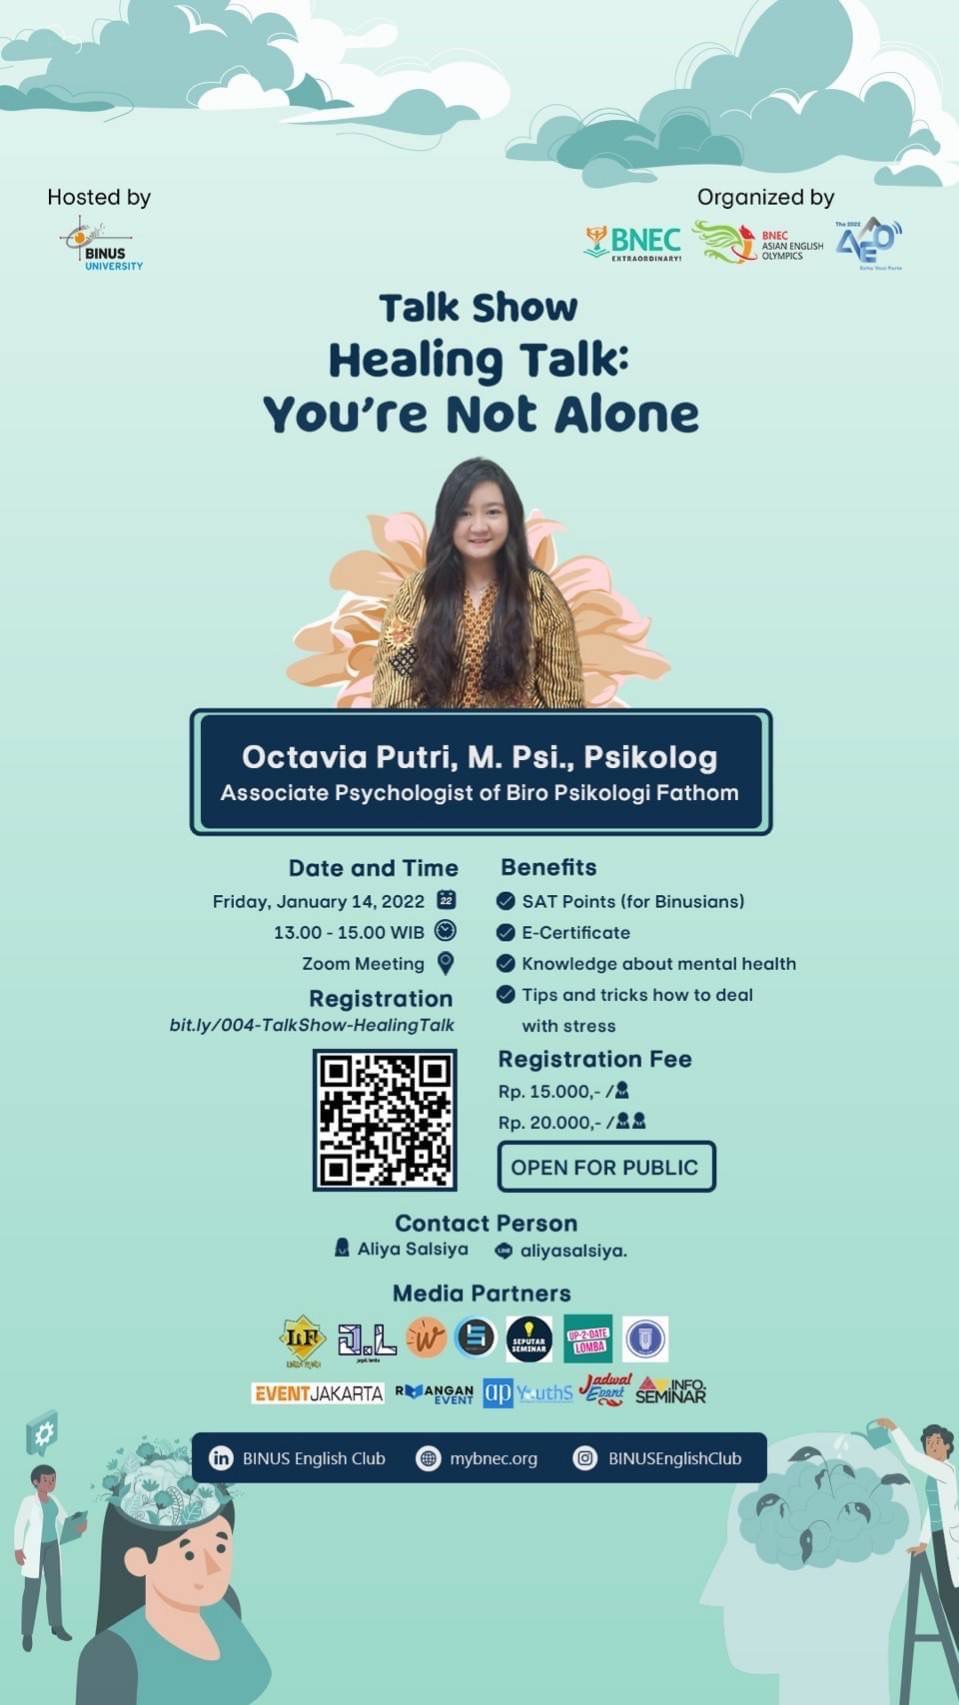 ?BNEC proudly presents "Healing Talk: You're Not Alone" Talk show.? 